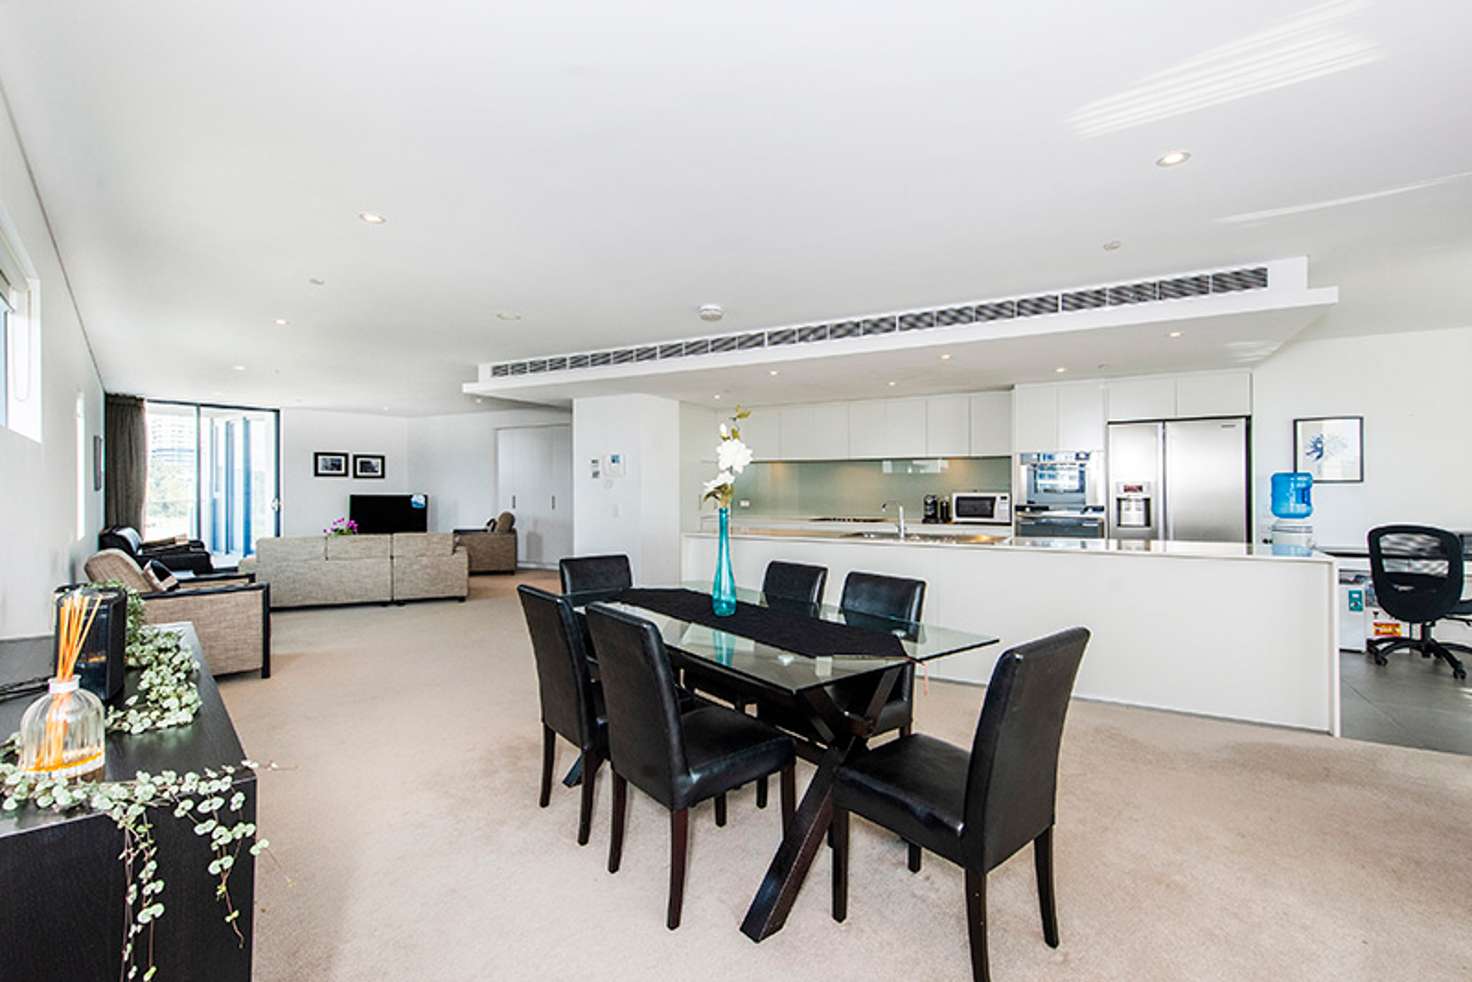 Main view of Homely apartment listing, 603/21 Bow River, Burswood WA 6100